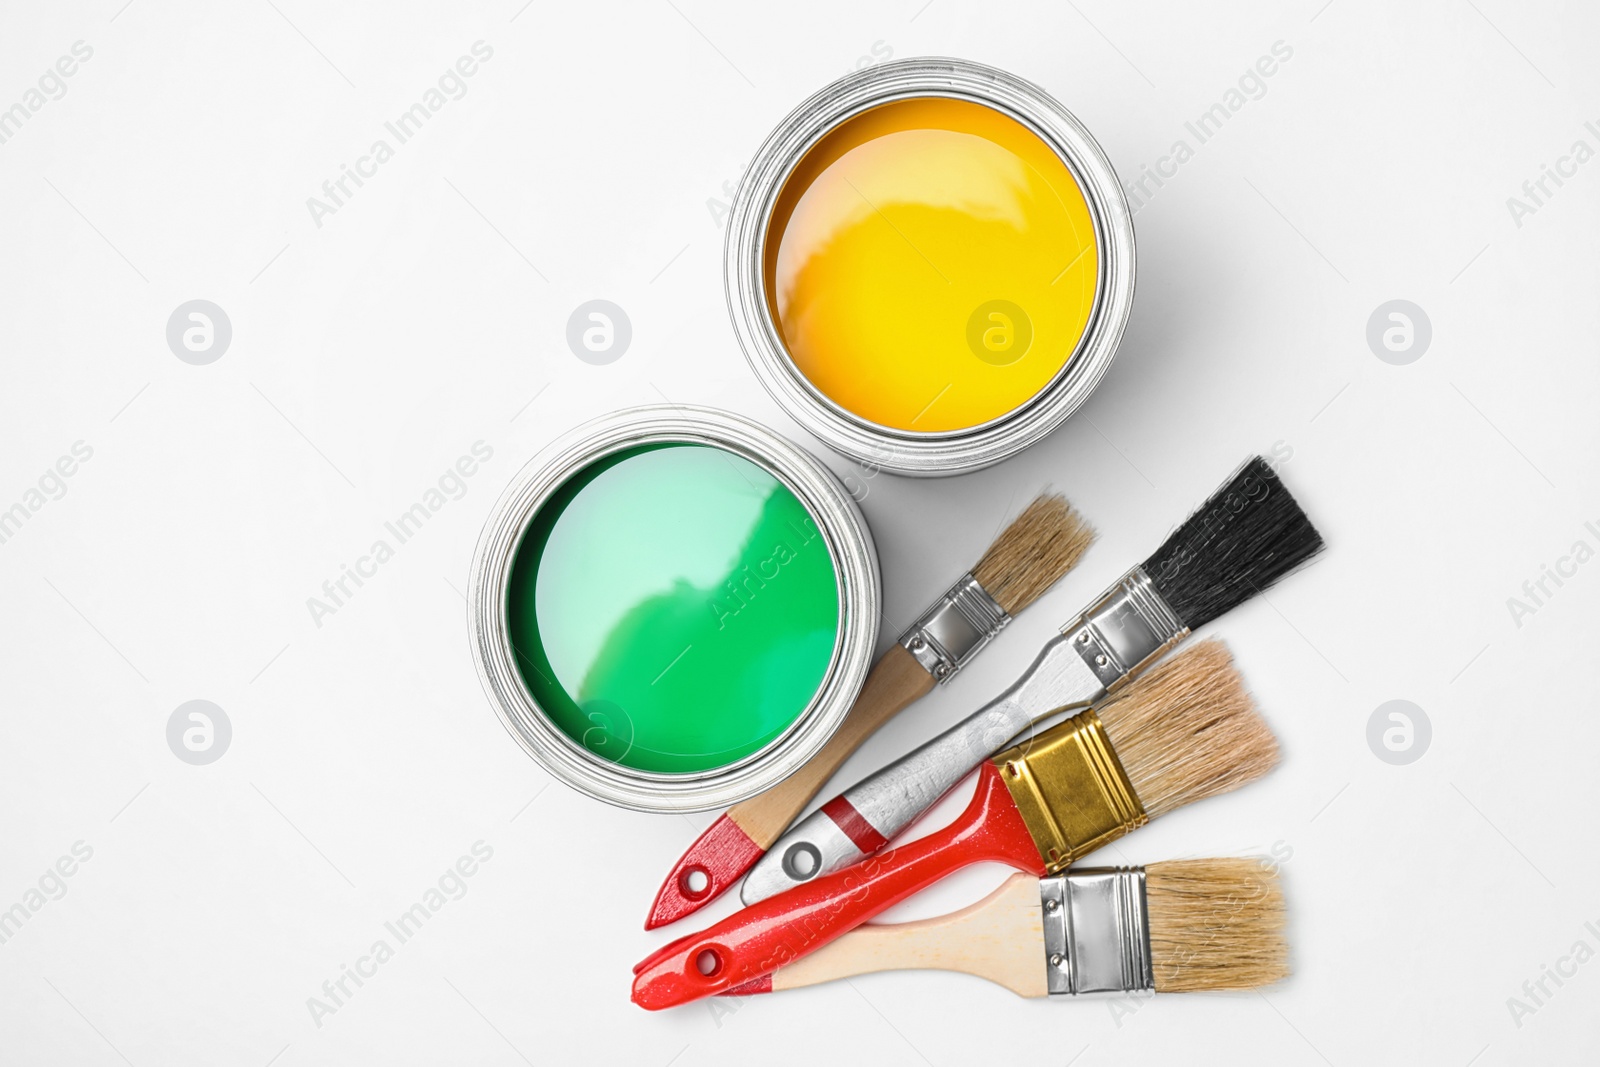 Photo of Open cans of paint and brushes on white background, top view